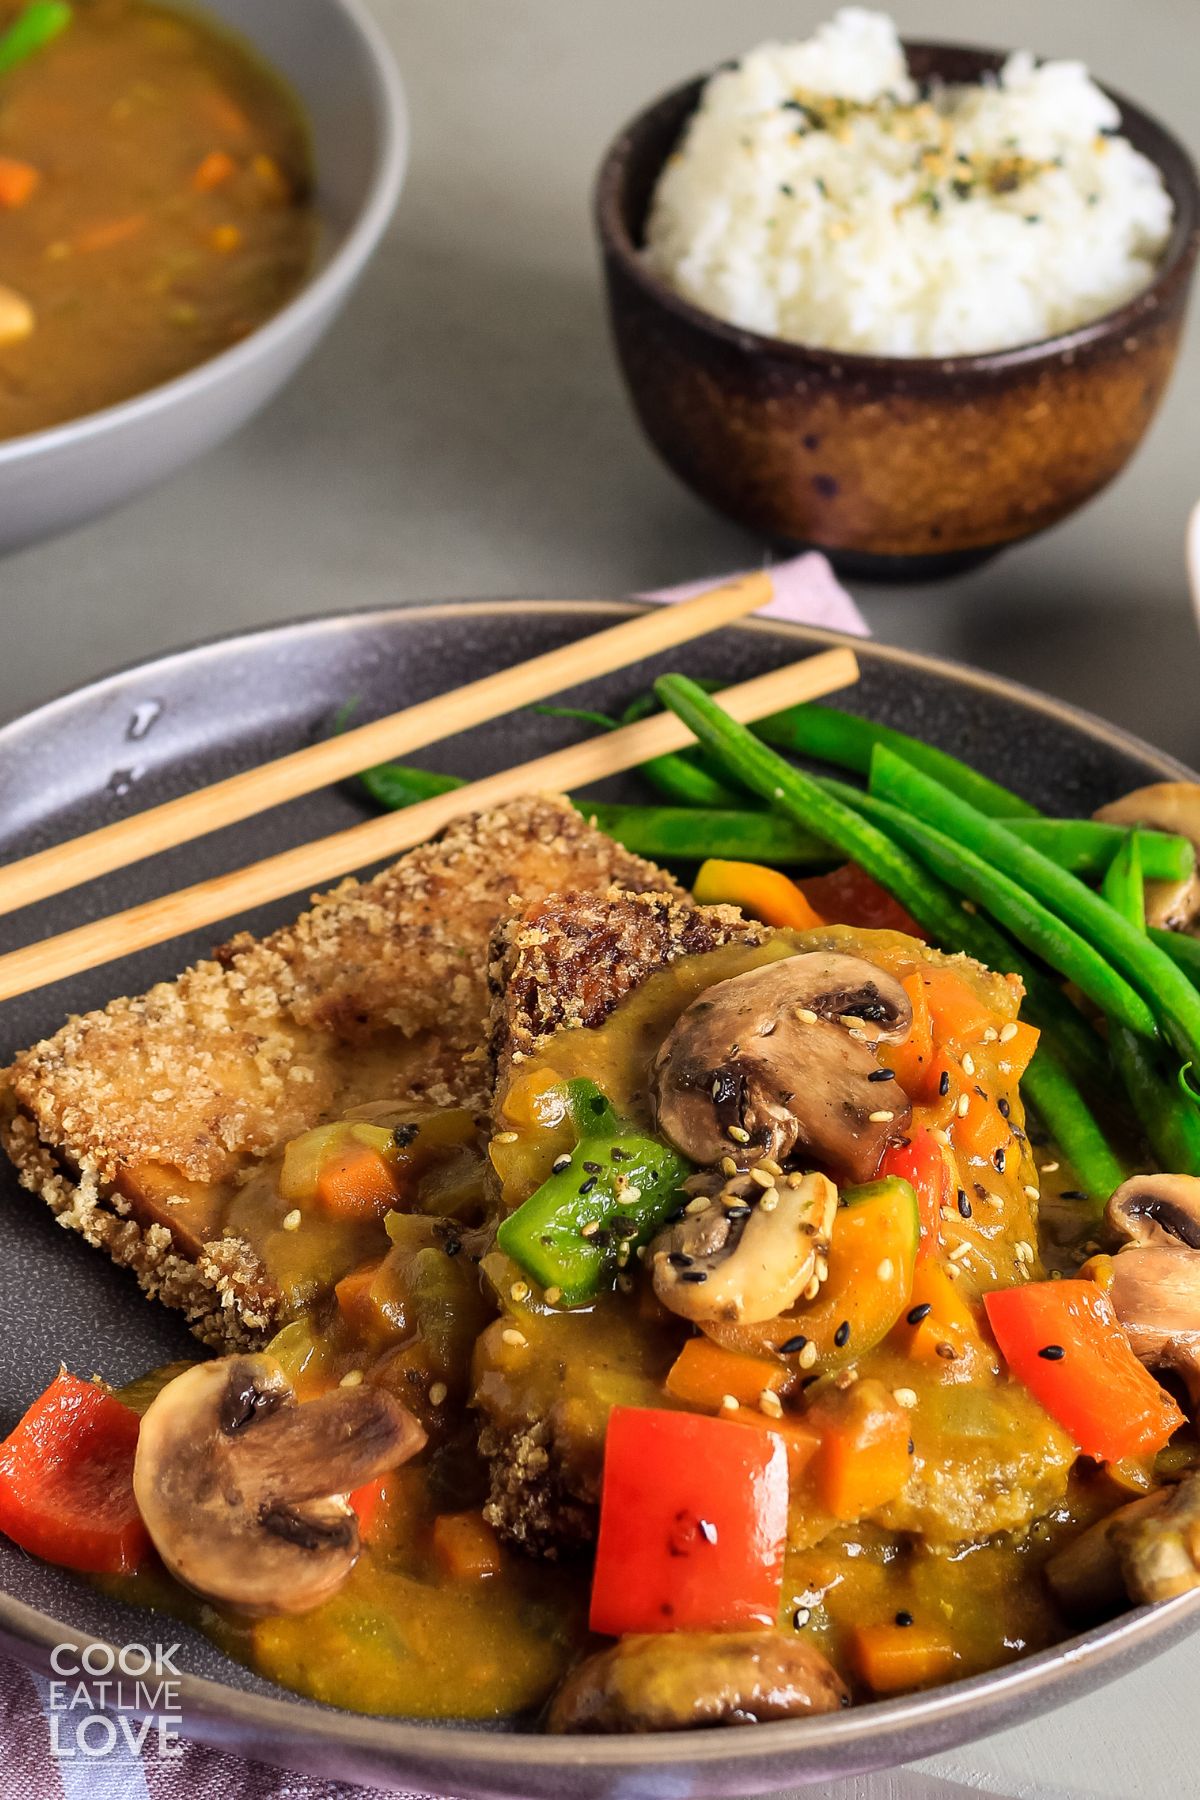 Vegetarian japanese curry served up with vegetables over a piece of crispy tofu.